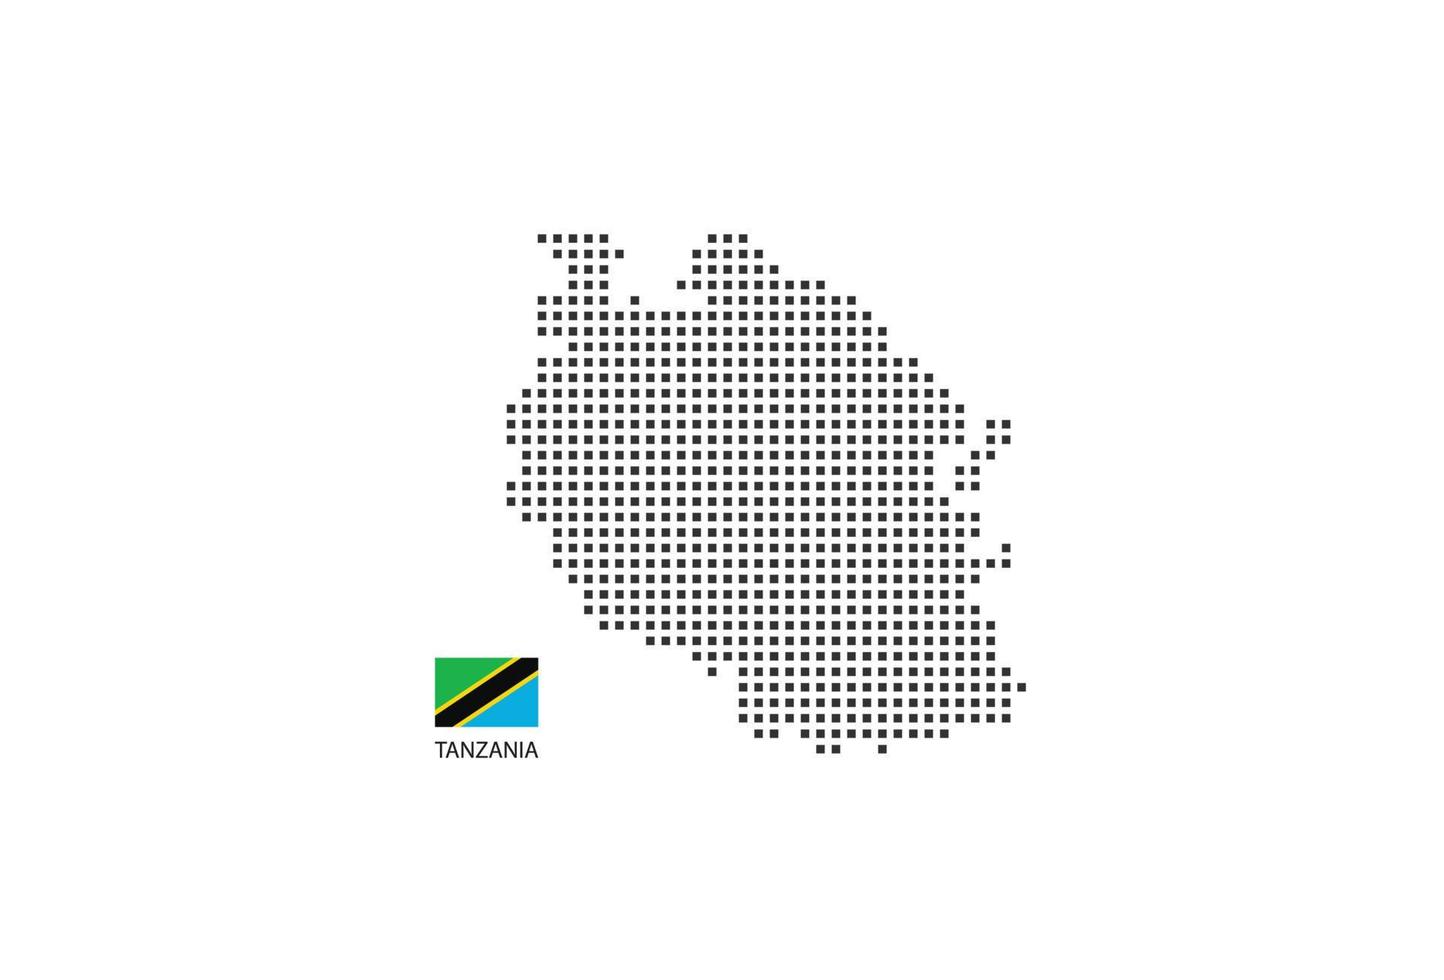 Vector square pixel dotted map of Tanzania isolated on white background with Tanzania flag.